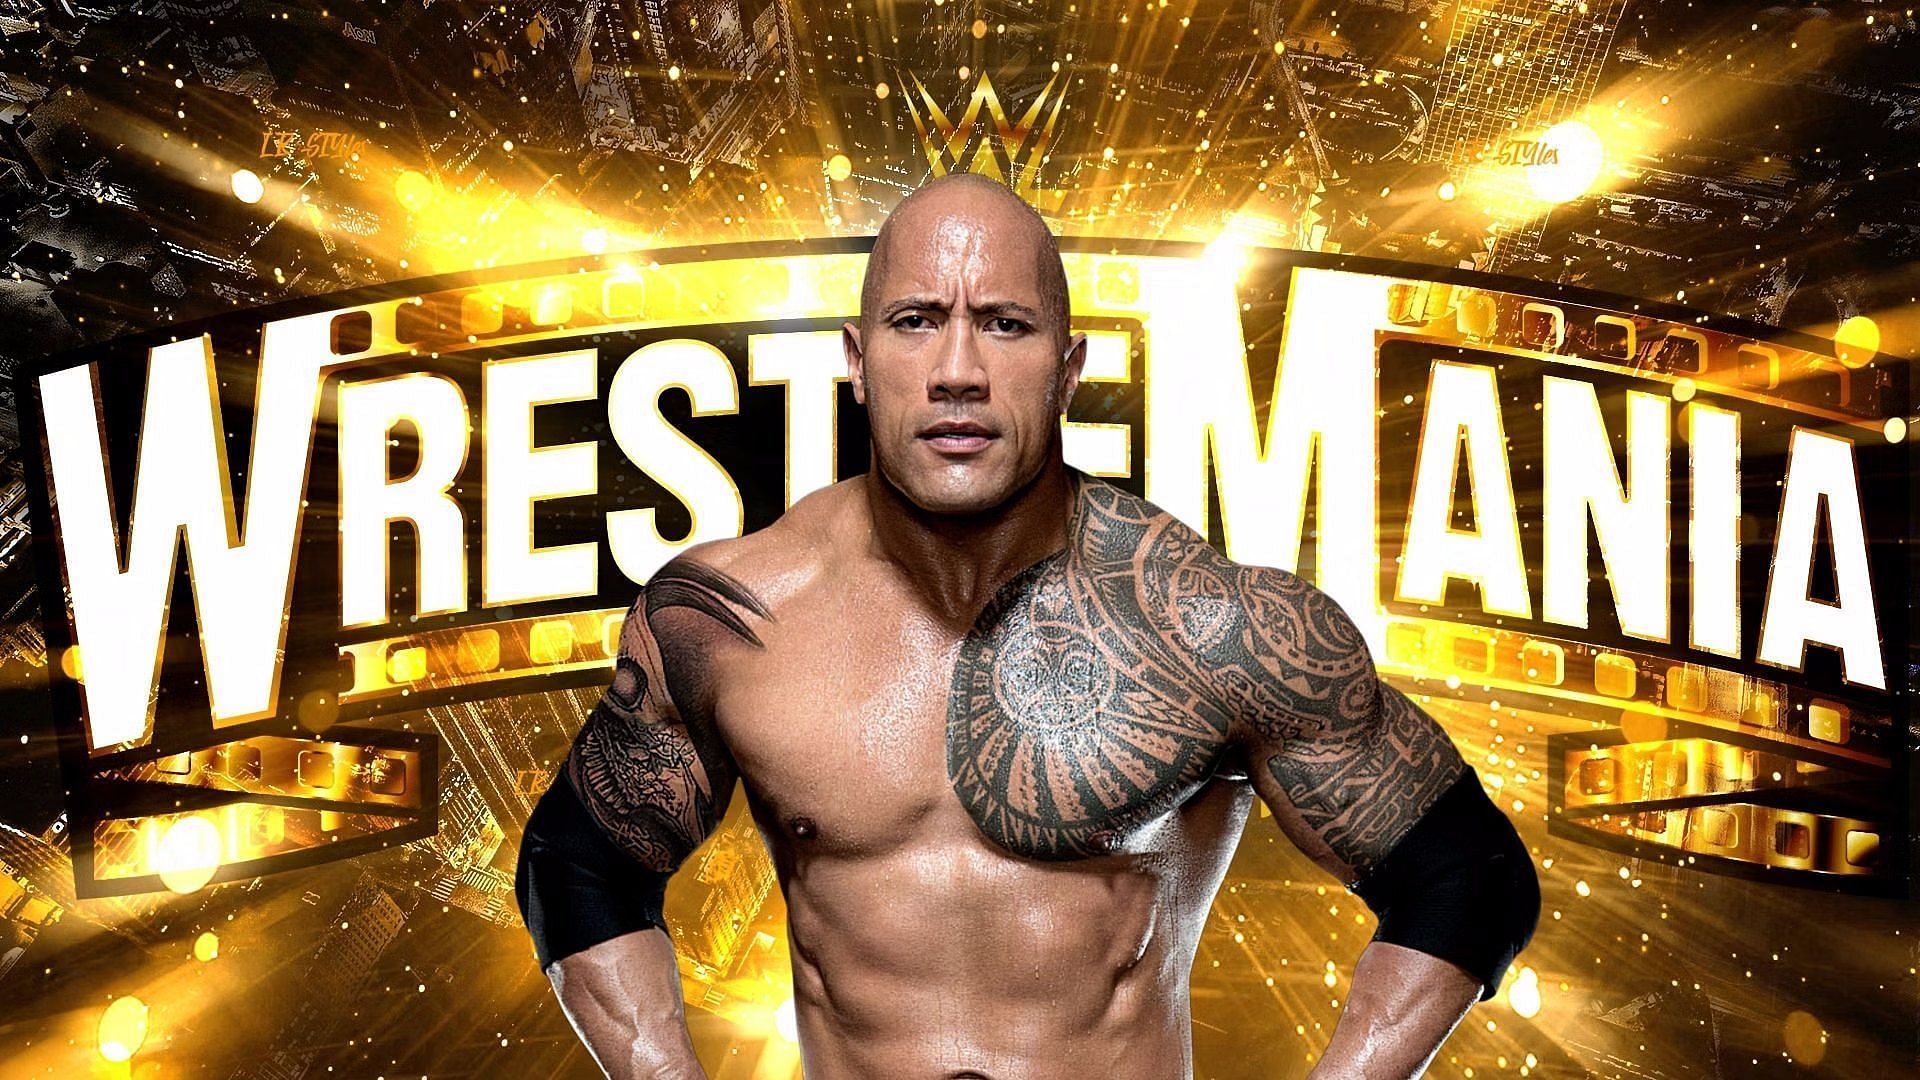 Potential Update on the WrestleMania 39 returns of The Rock and multi